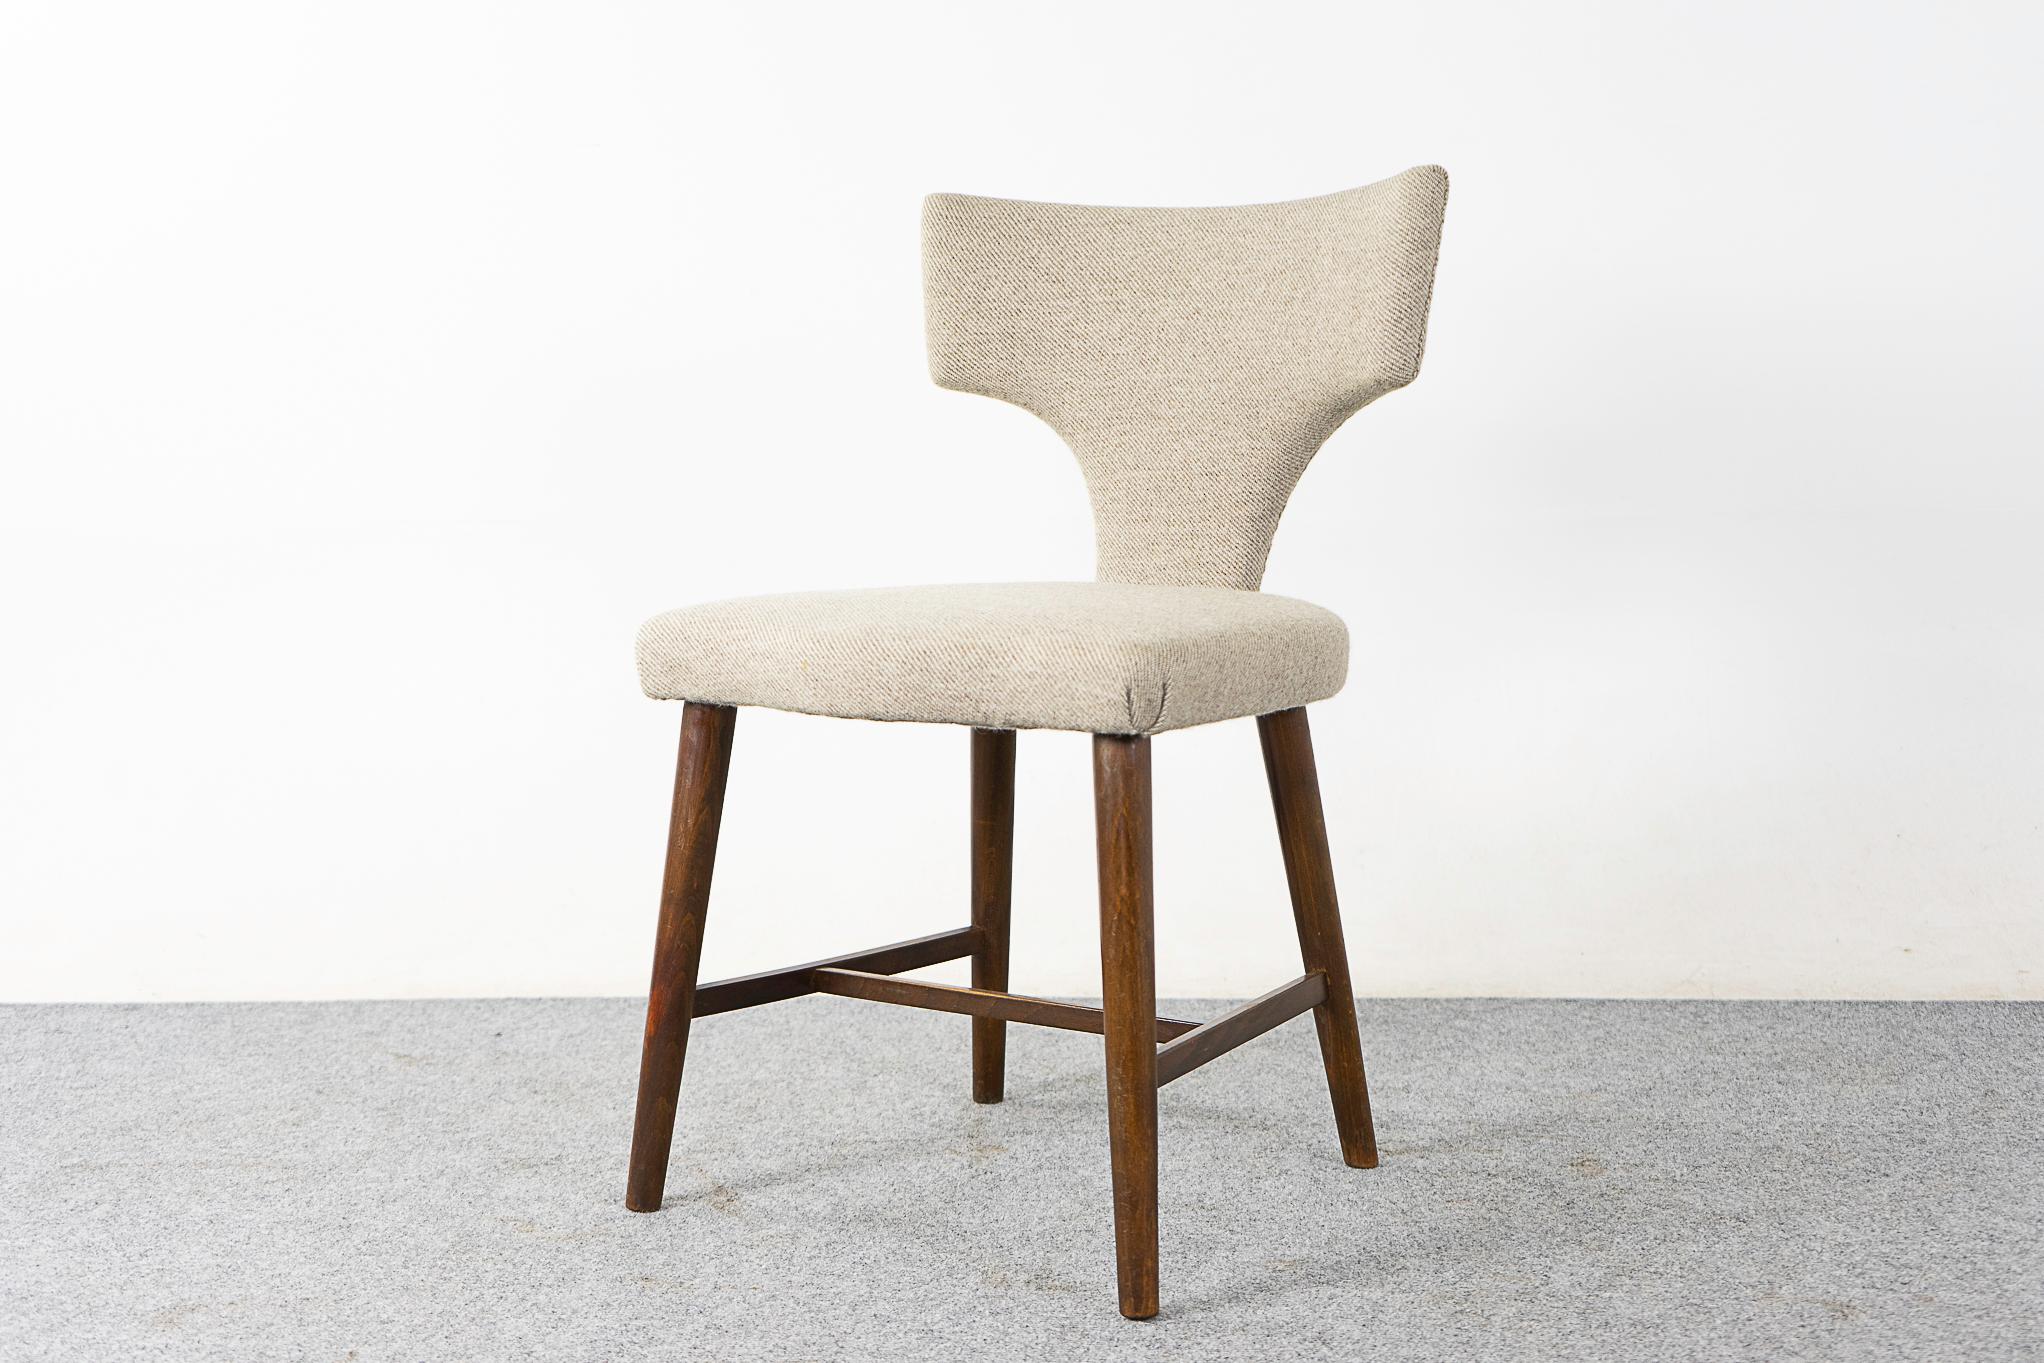 Beech wood chair, circa 1960's. Perfectly petite, darling striking profile with original cream upholstery with minor wear. Would work great with a vanity! 

Please inquire for a remote and international shipping rates.